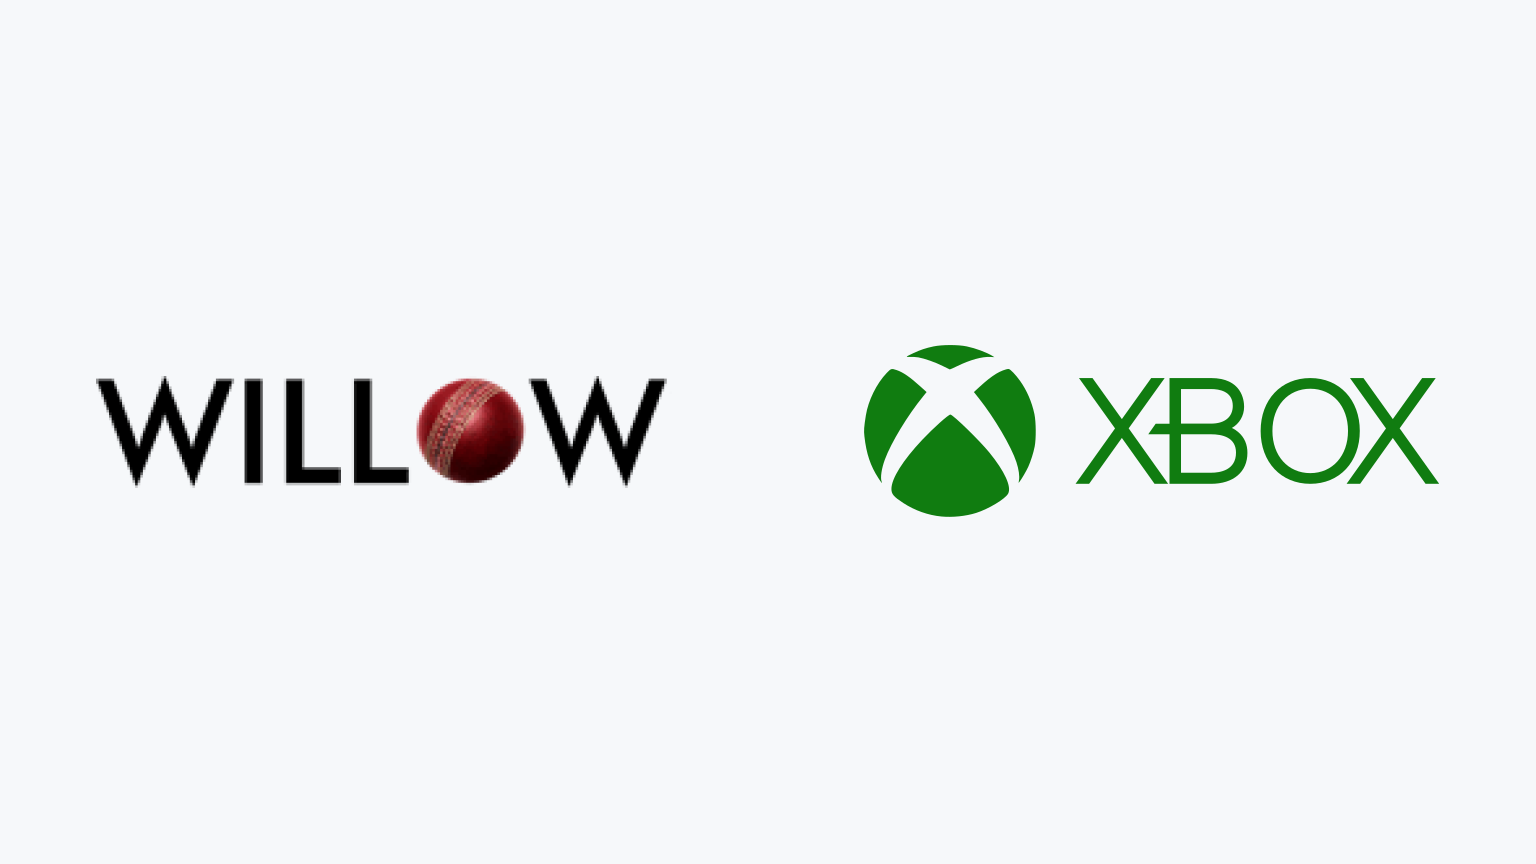 How to Watch Willow on Xbox